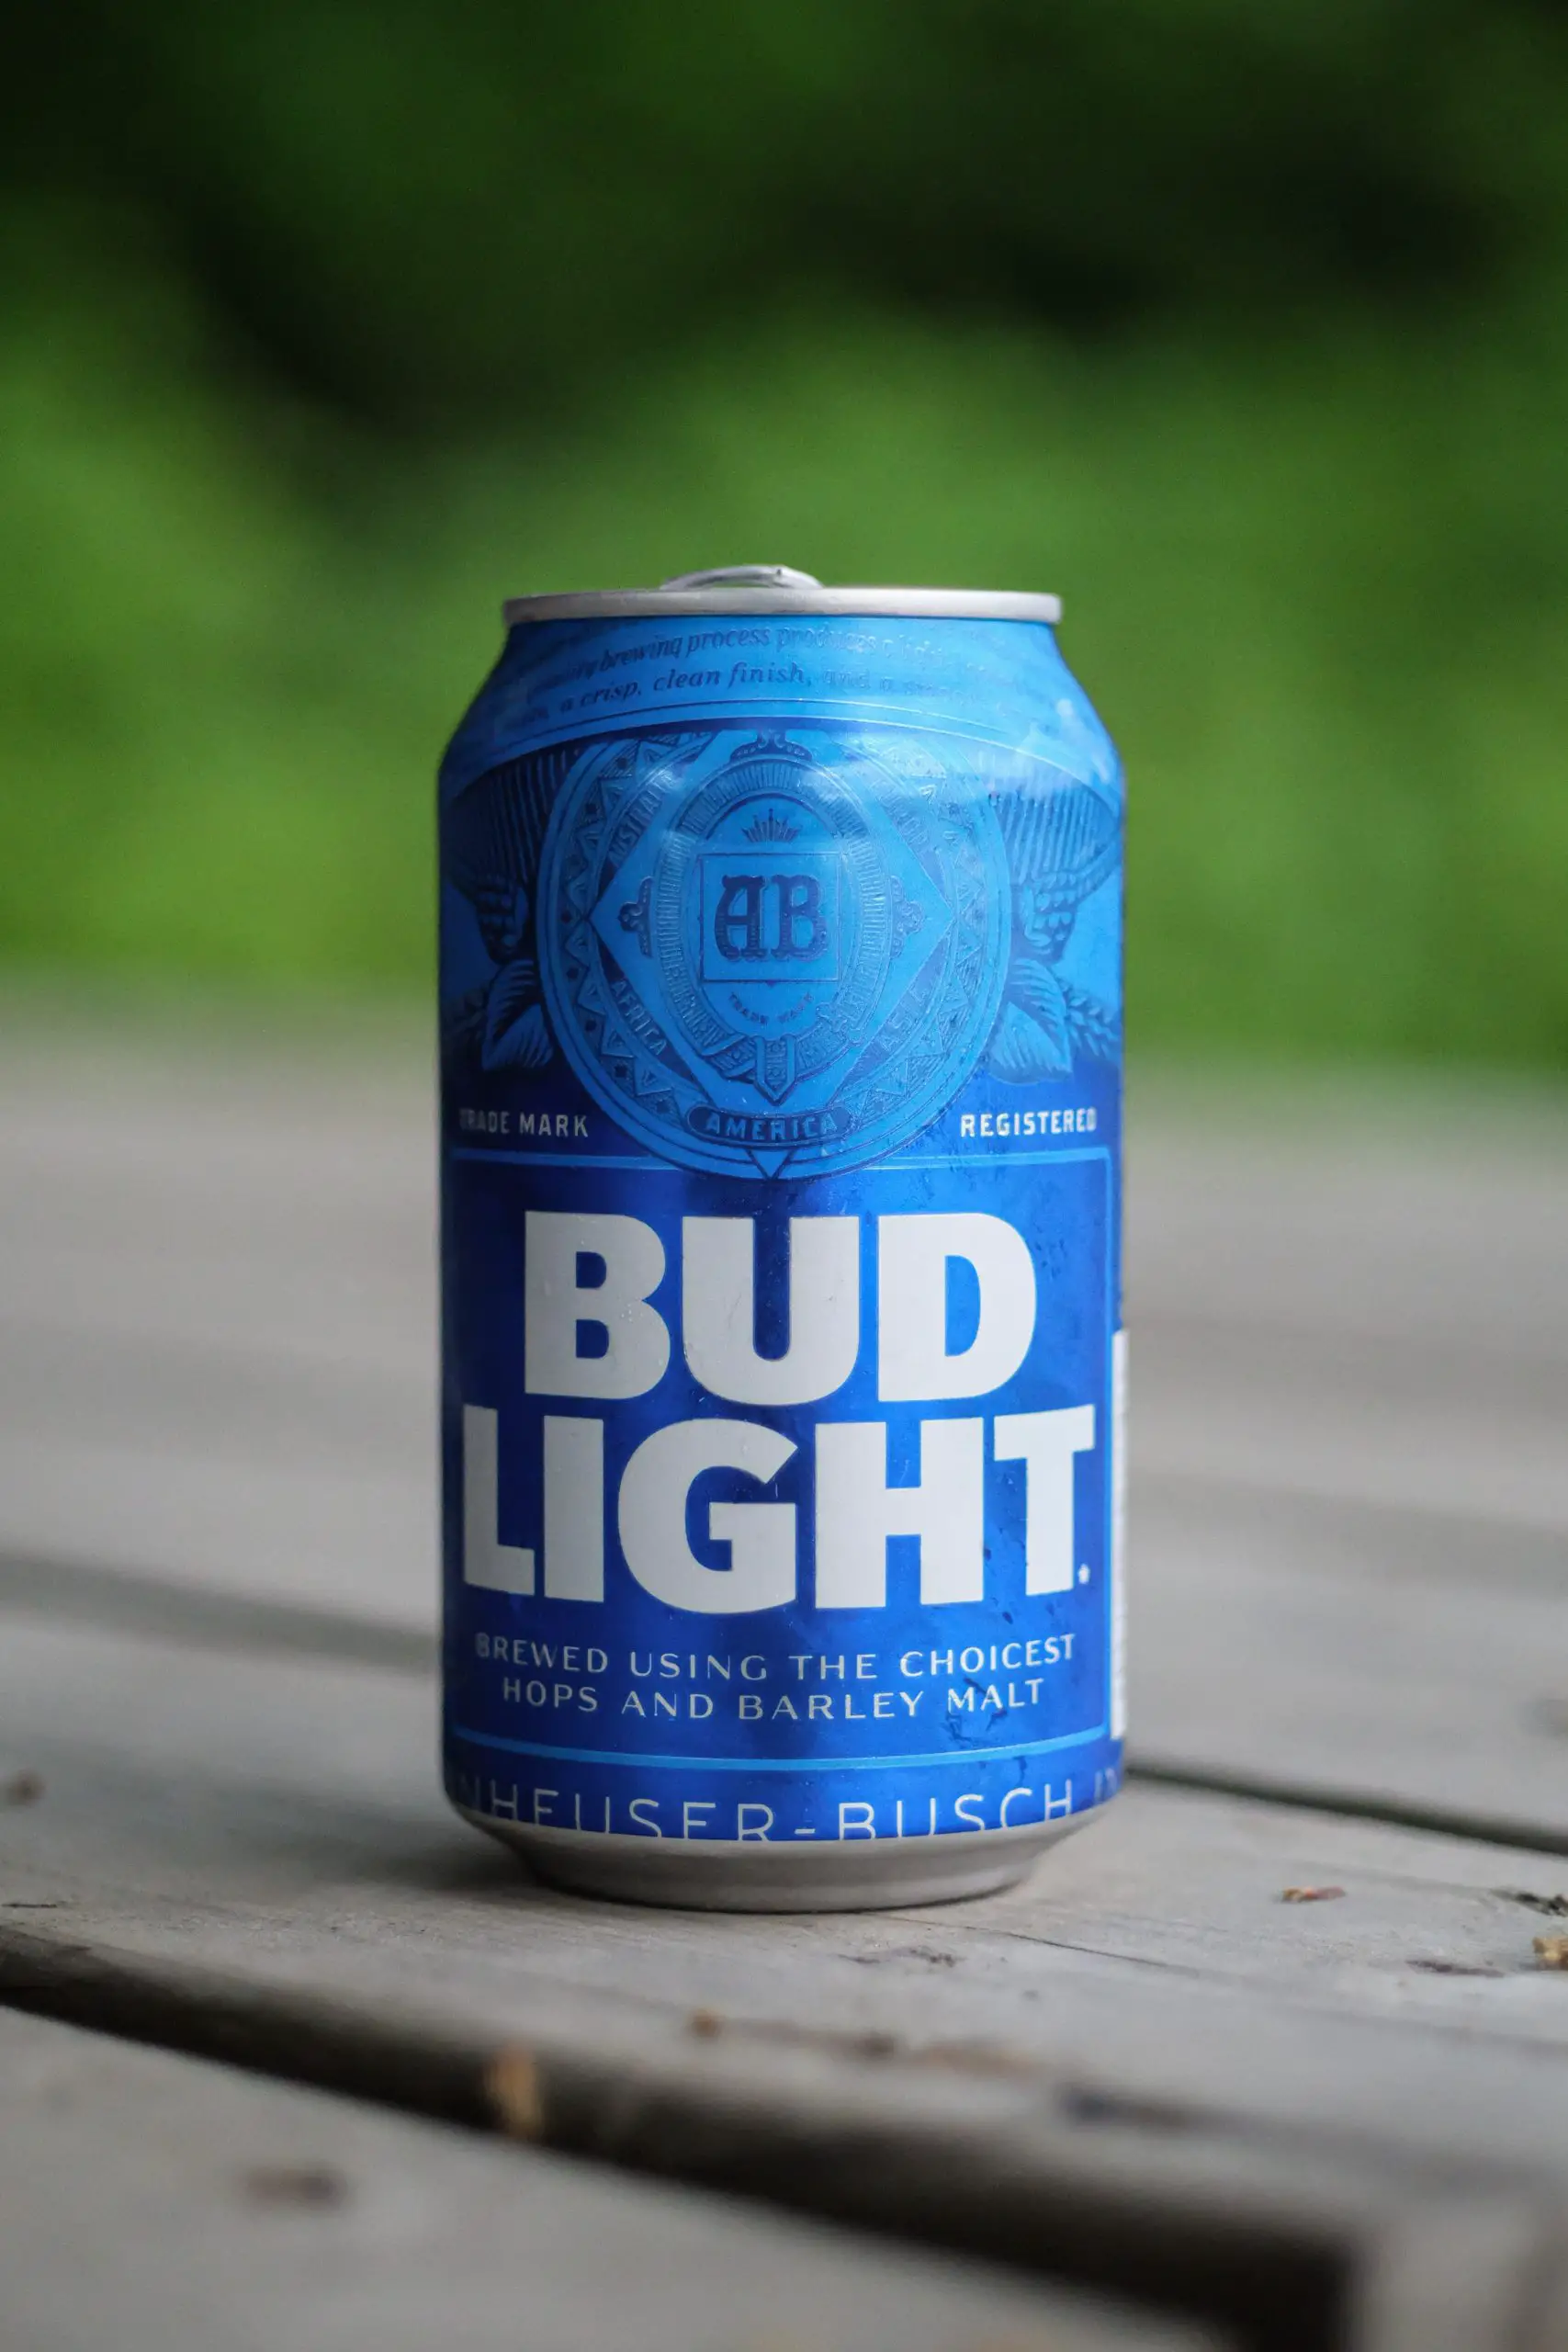 Picture of a can of Bud Light